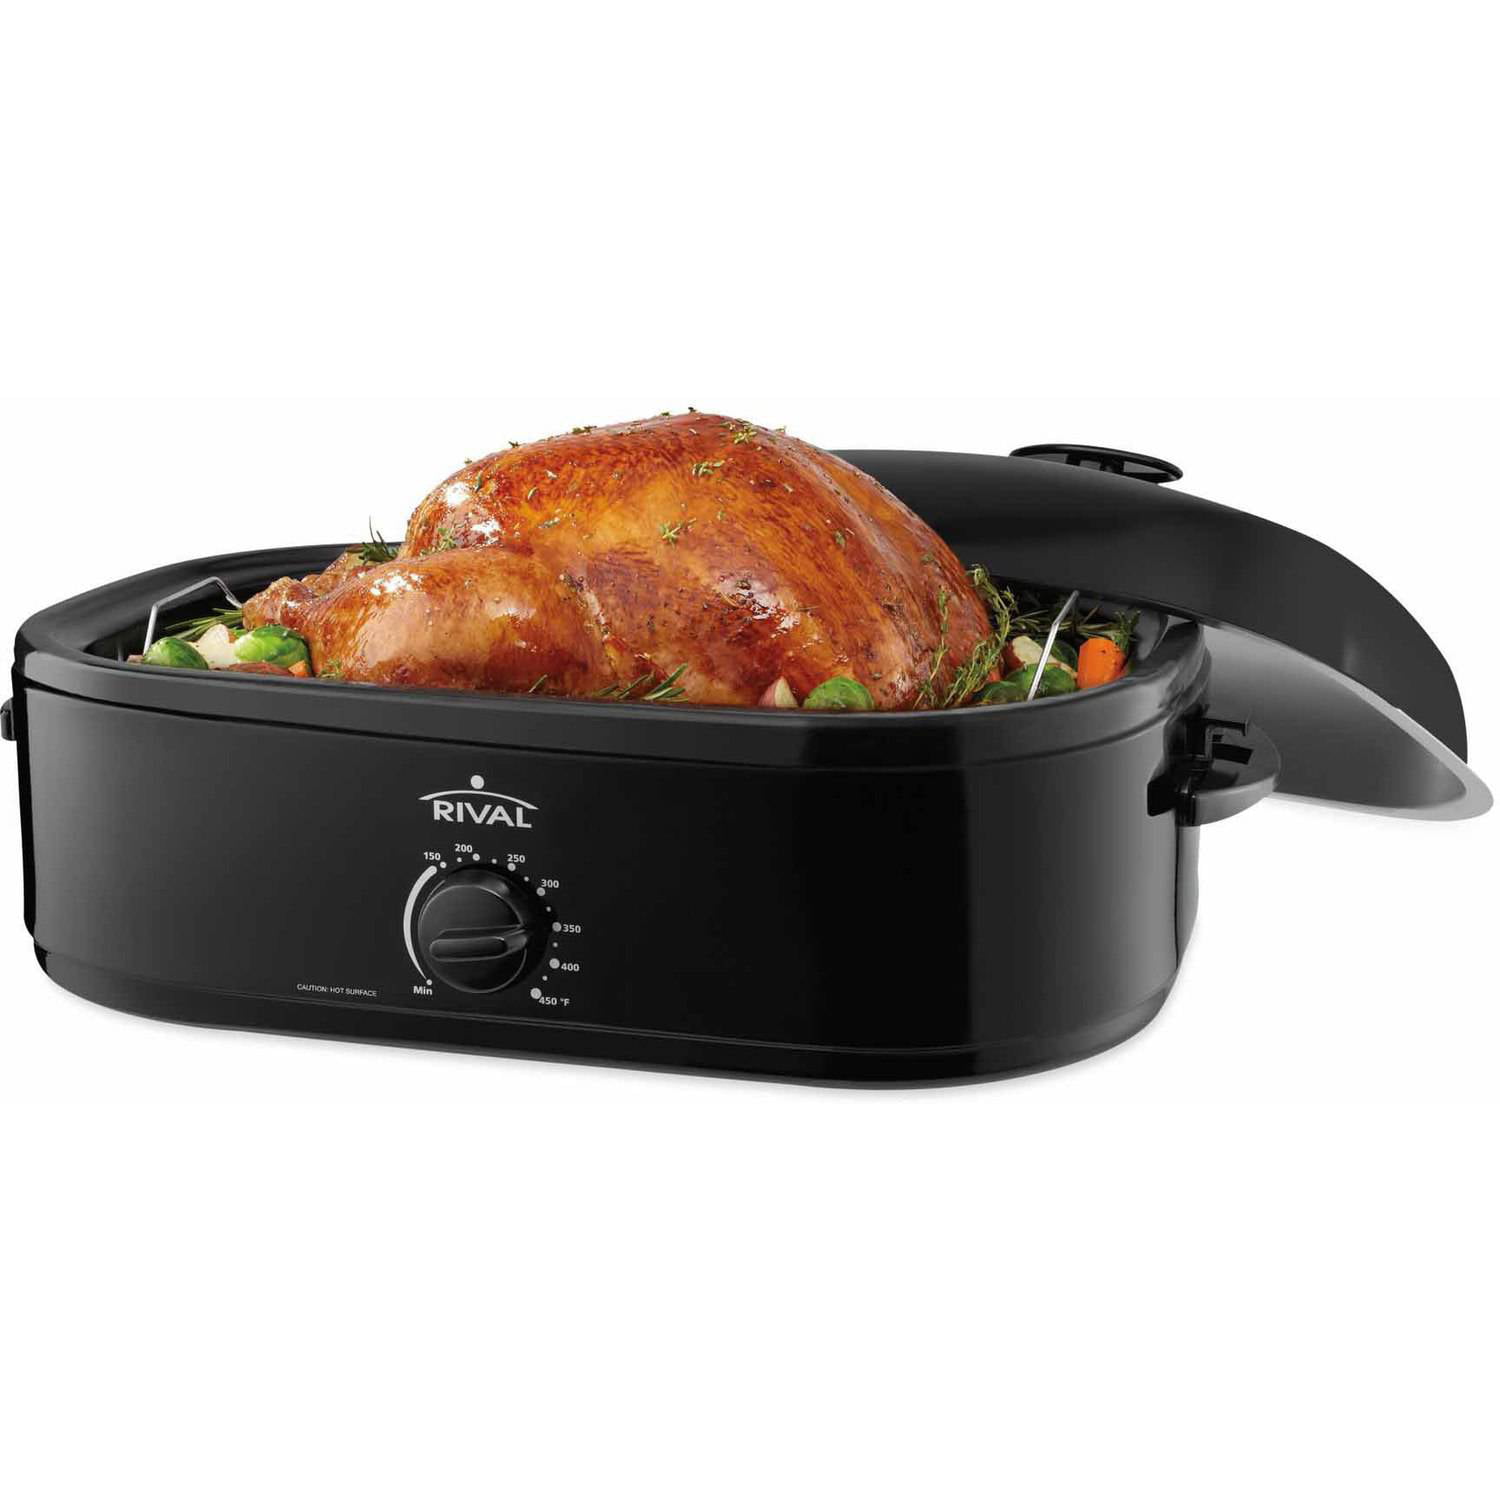 Rival 20 Pound 14 Quart Turkey Roaster Oven With High Dome Lid